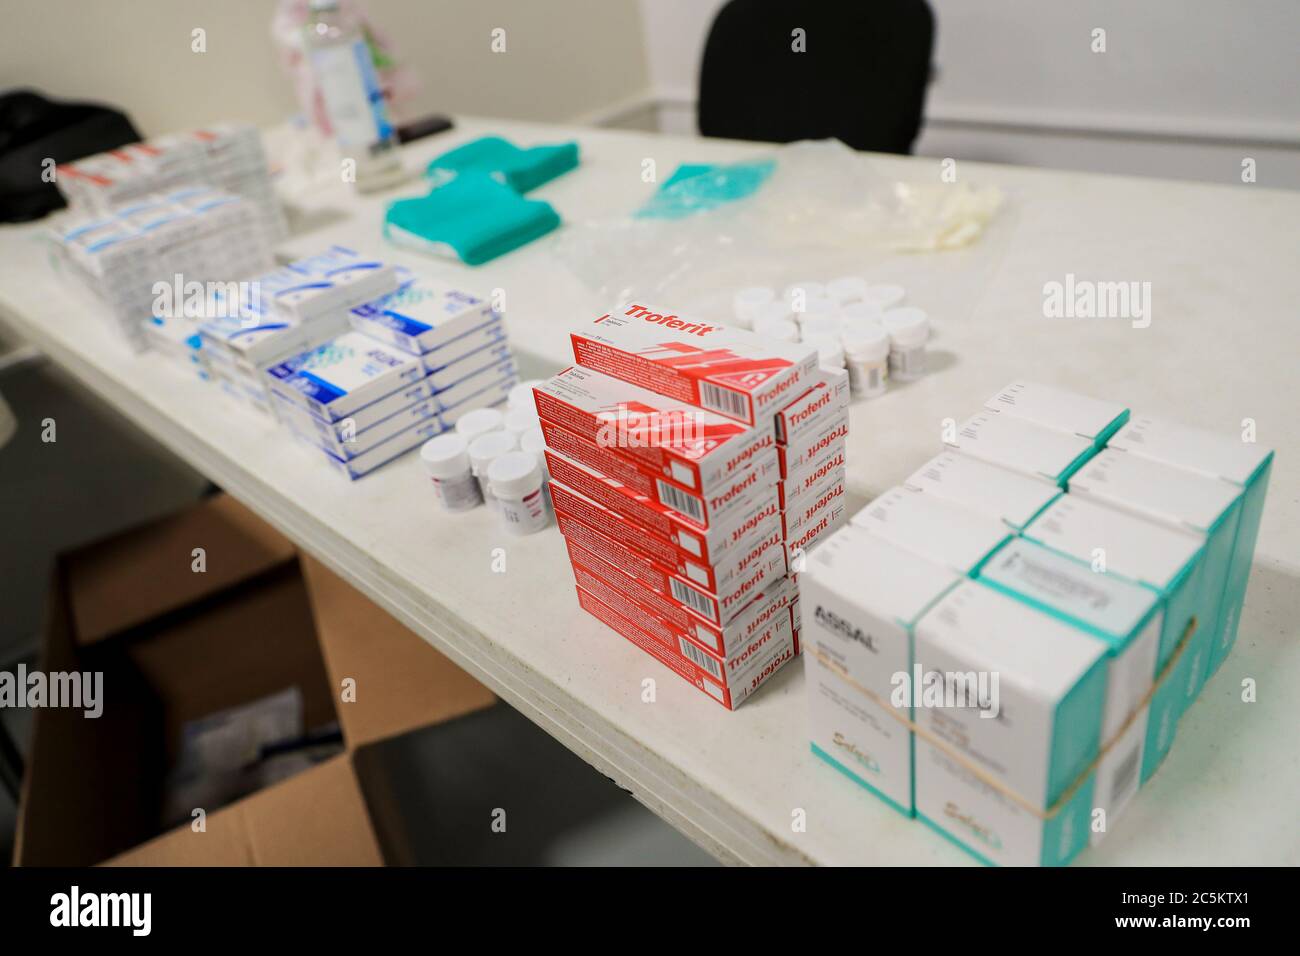 HERMOSILLO, MEXICO - JULY 3: Medical and health personnel carry out rapid tests and follow-up on people who present symptoms of covid-19 in the facilities of the Arena Sonora, which has led to the red alert due to the increase in cases in the state of Sonora on July 3, 2020 in Hermosillo, Mexico. (Luis Gutierrez / Norte Photo /) Troferit.  HERMOSILLO, MEXICO - JULY 3: Medical and health personnel carry out rapid tests and follow-up on people who present symptoms of covid-19 in the facilities of the Arena Sonora, which has led to the red alert due to the increase in cases in the state of Sonora Stock Photo